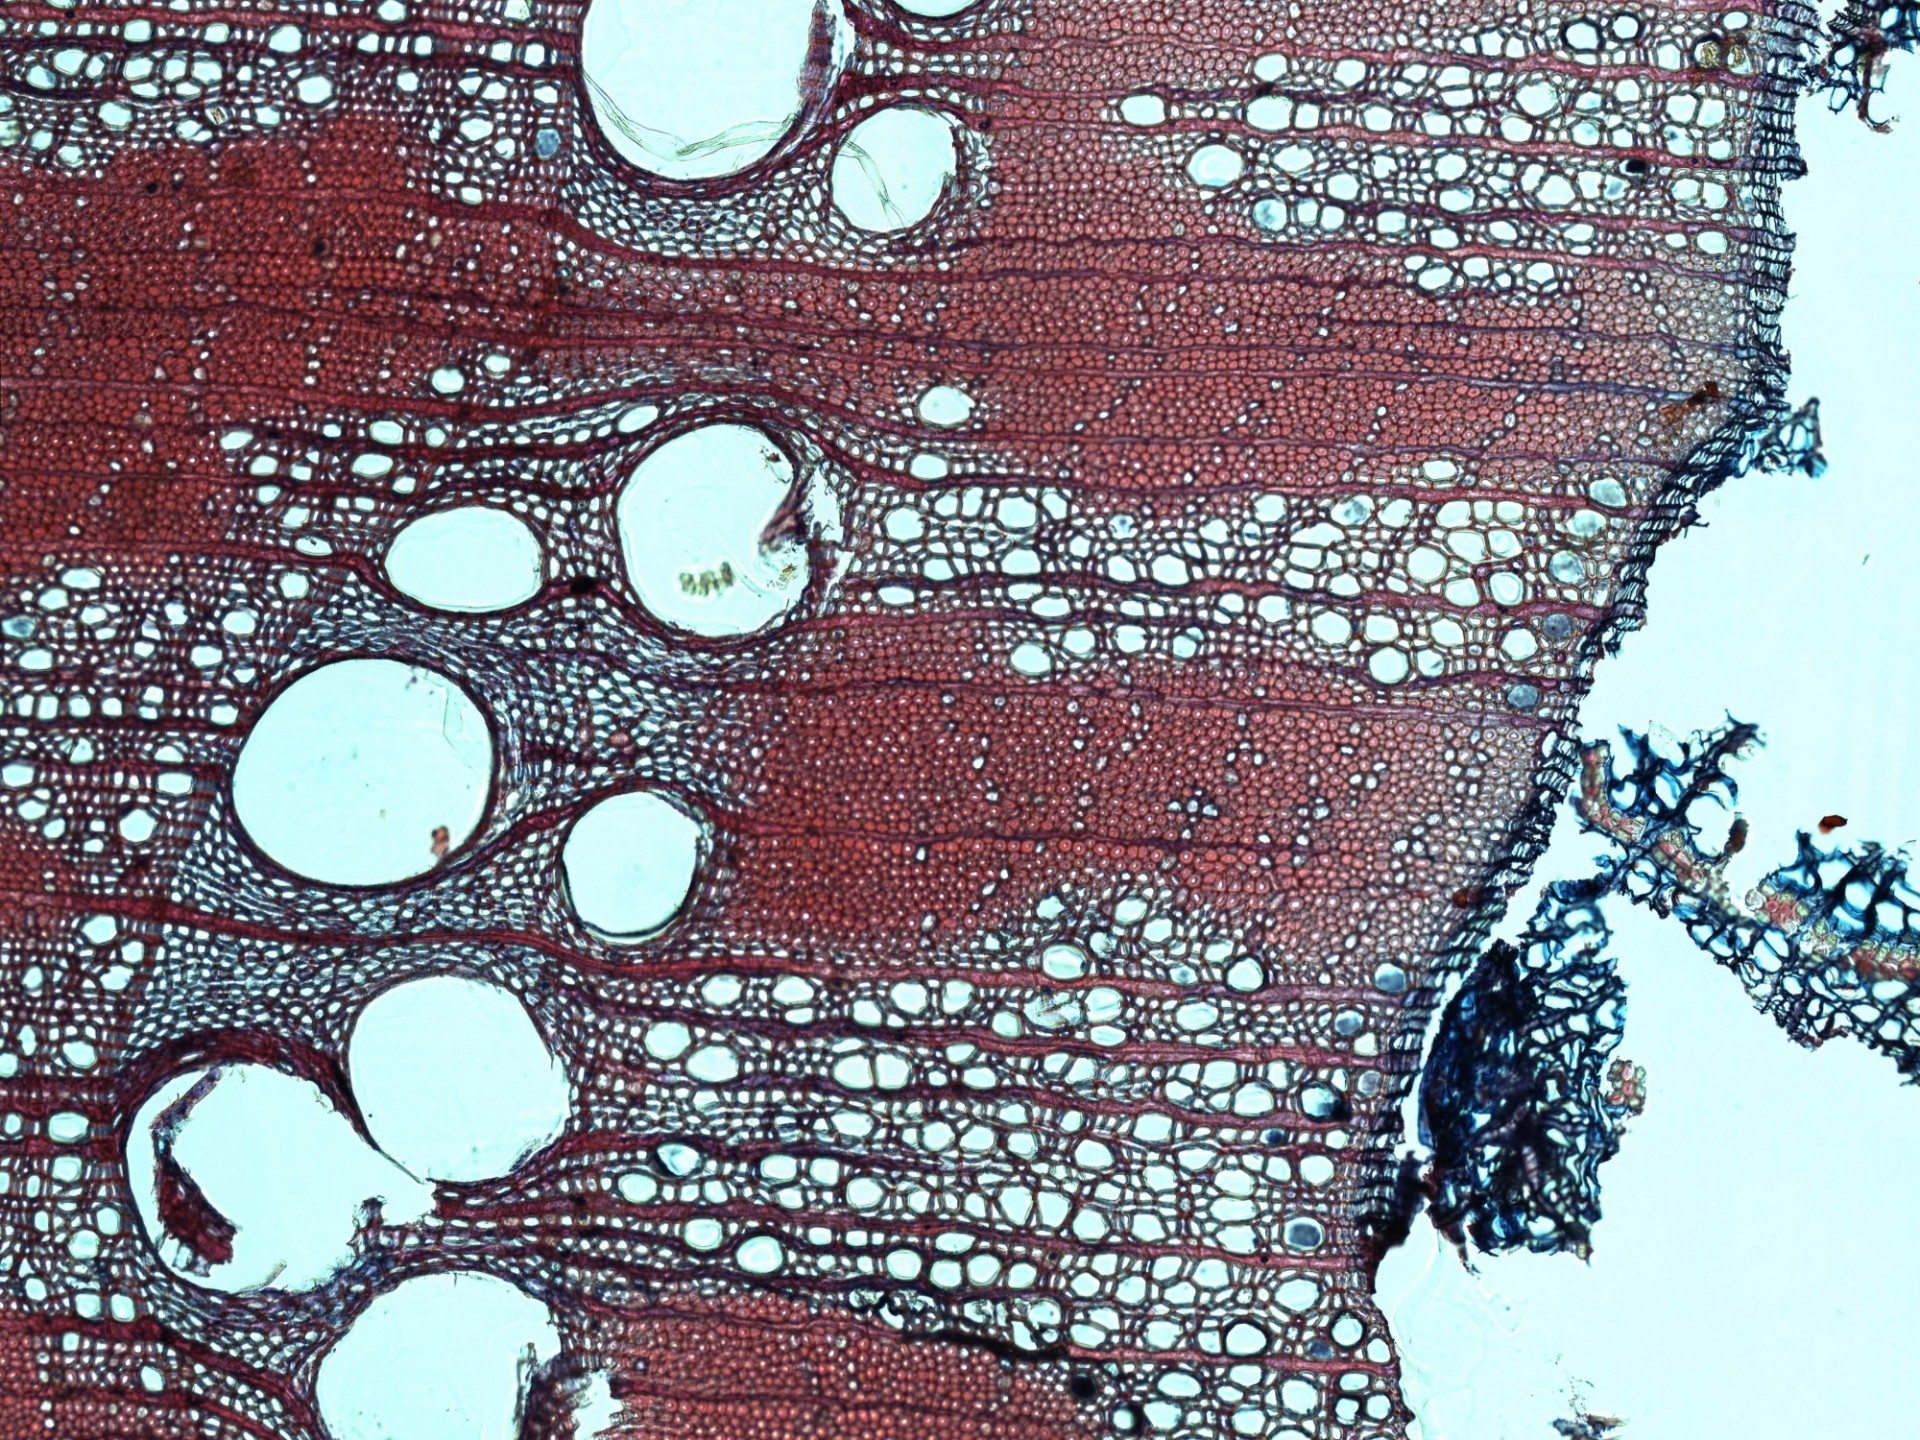 Wood anatomy of White Oak (Quercus alba). Sample collected within the Lamont Sanctuary Forest, New York (2021). Anatomical microsection prepared at LDEO Tree Ring Lab by Mukund Palat-Rao.